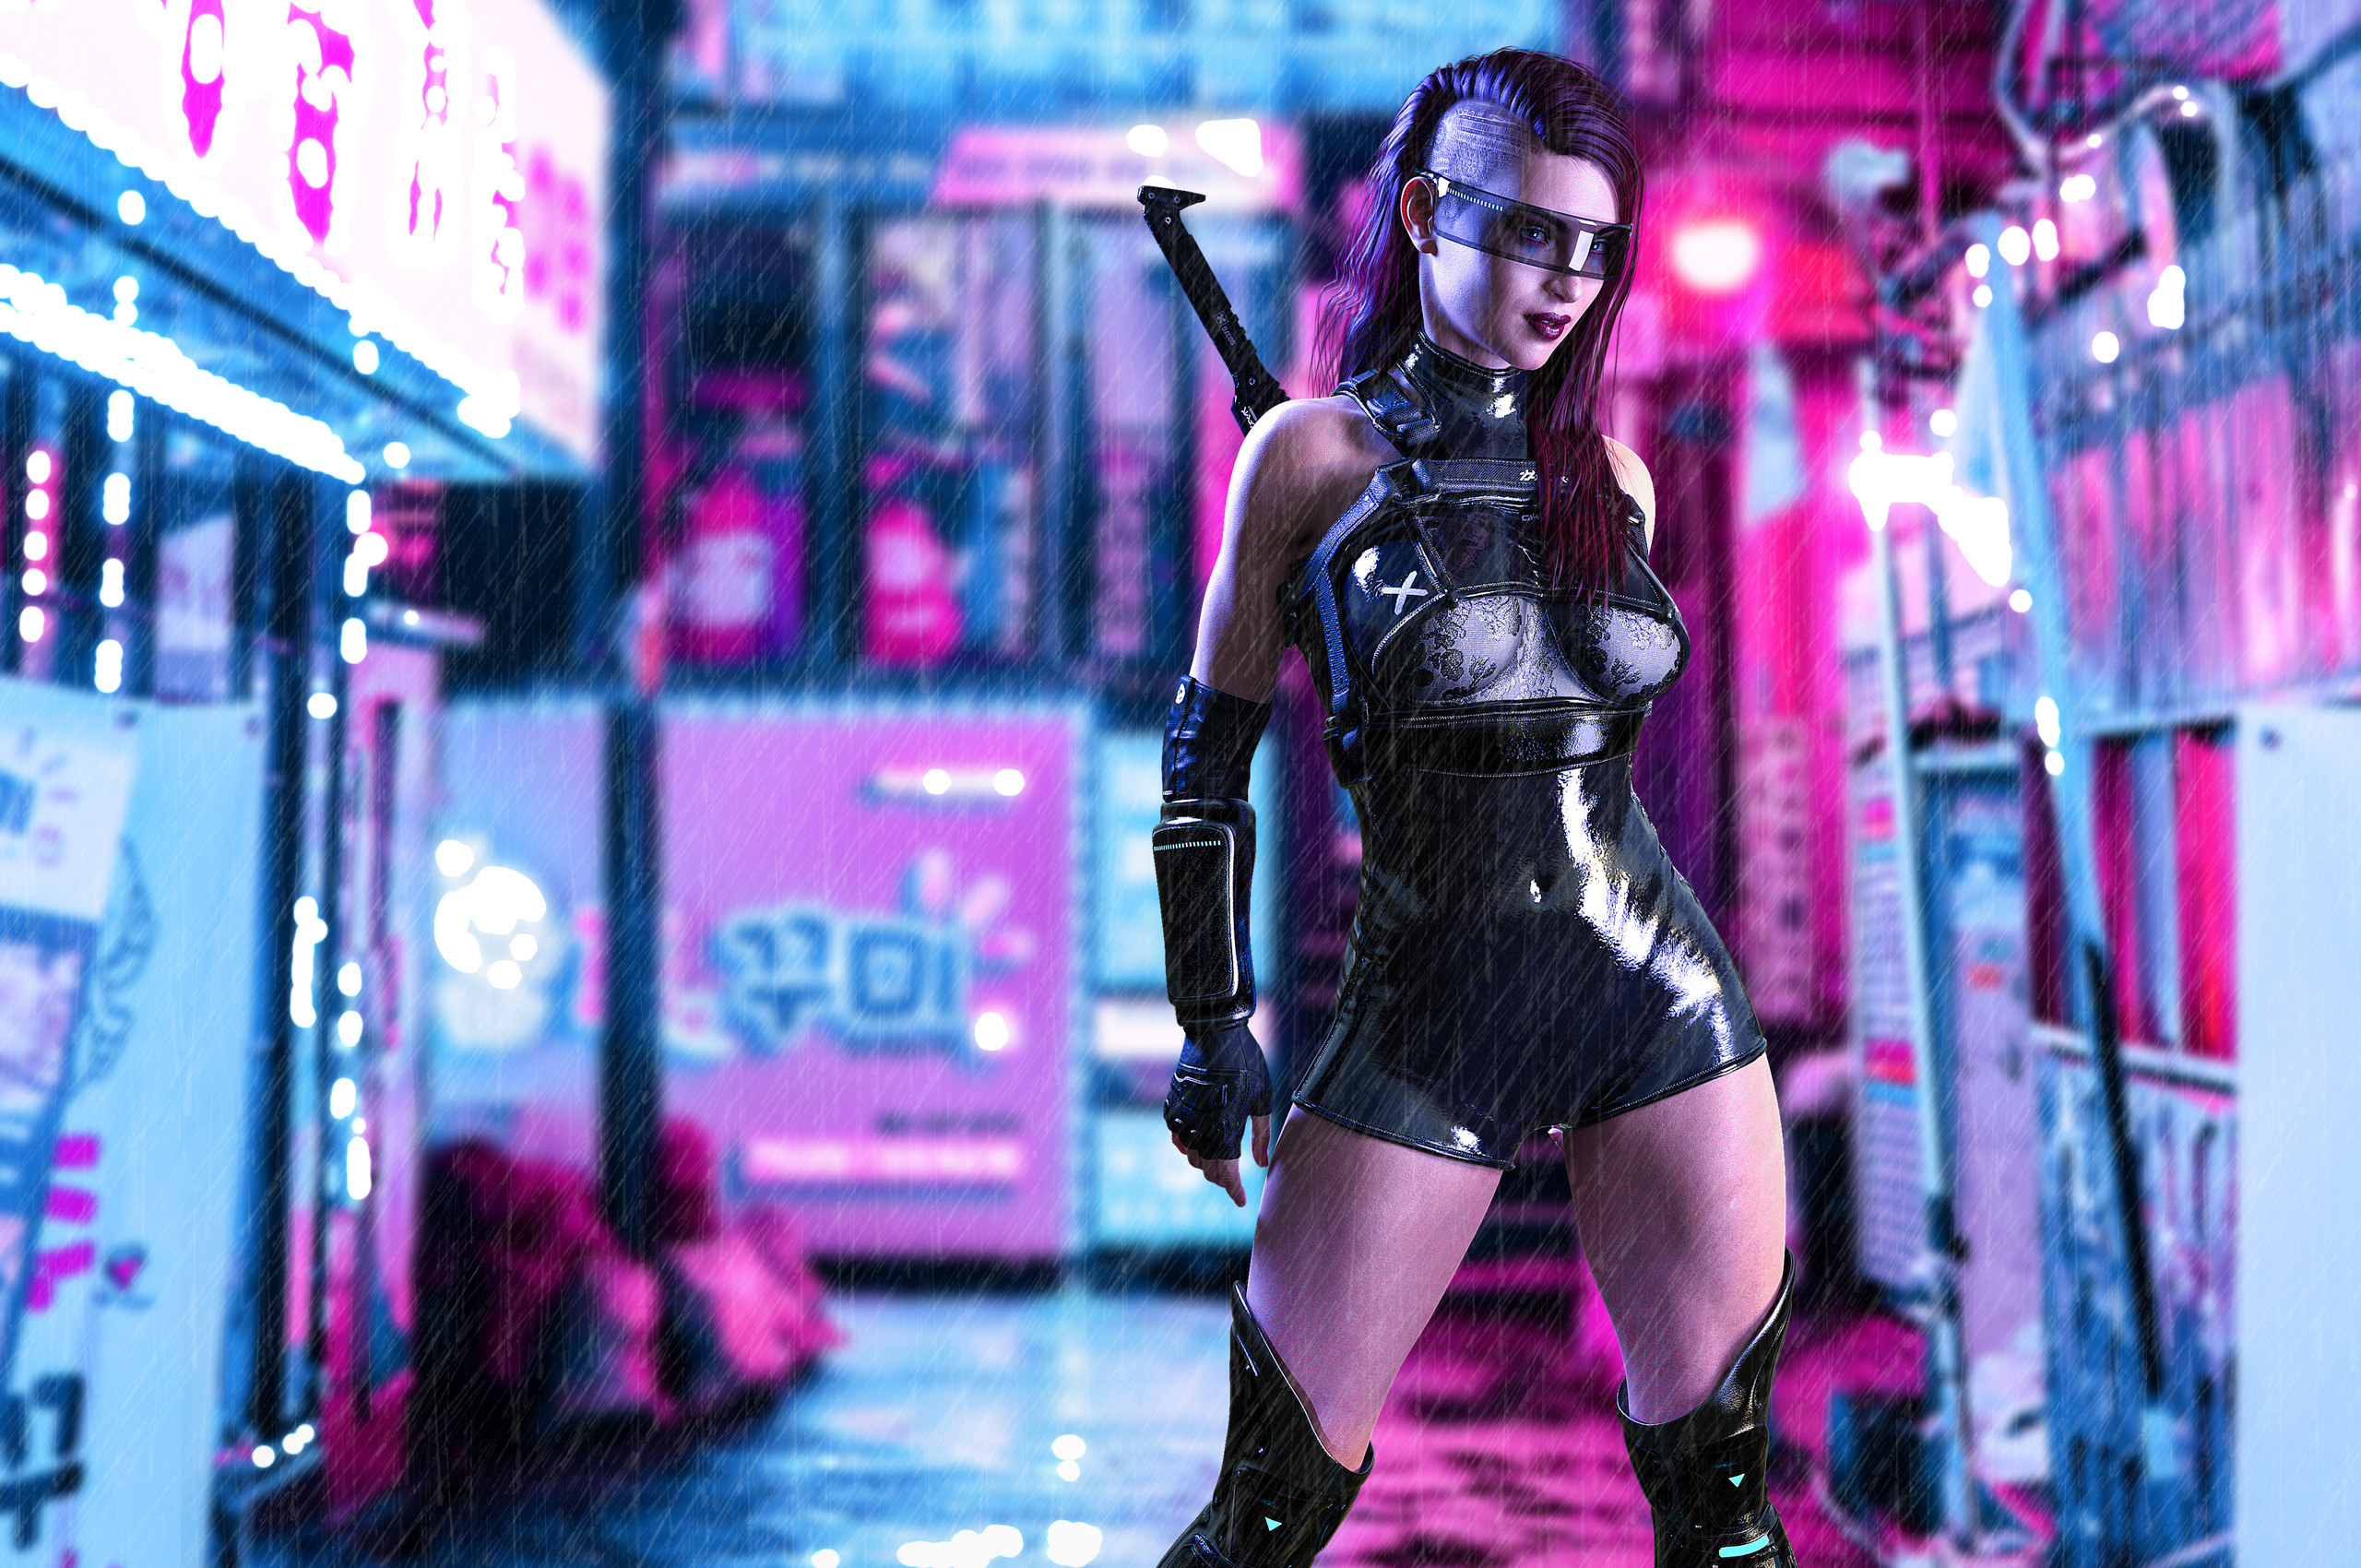 Cyber Girl With Sword 5k In 2560x1700 Resolution. cyber-girl-with-sword-5k-...